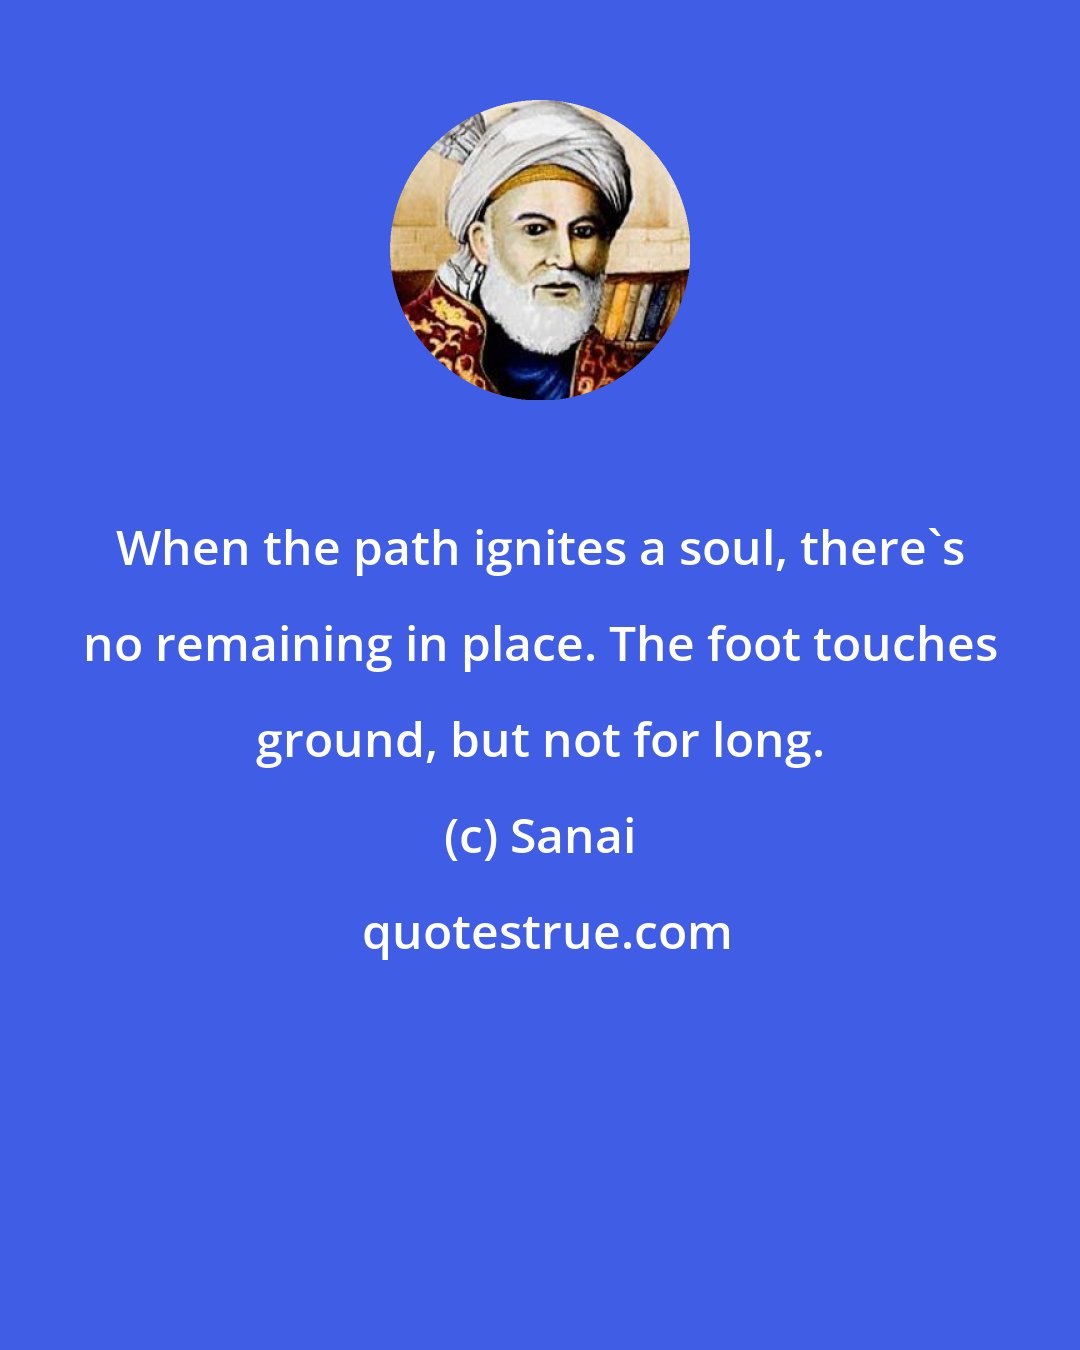 Sanai: When the path ignites a soul, there's no remaining in place. The foot touches ground, but not for long.